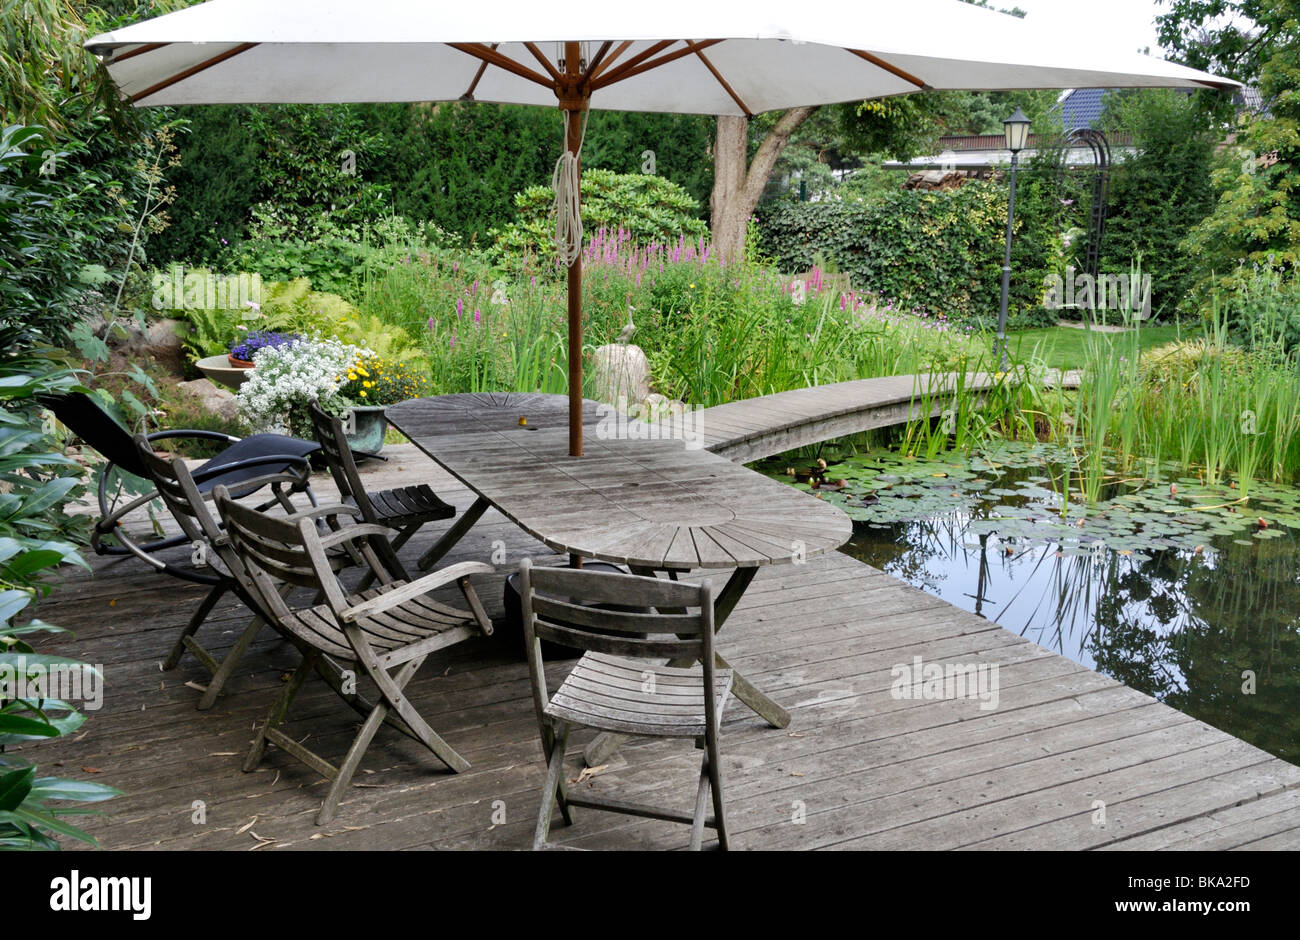 Wooden decking area with seats at a swimming pond Stock Photo